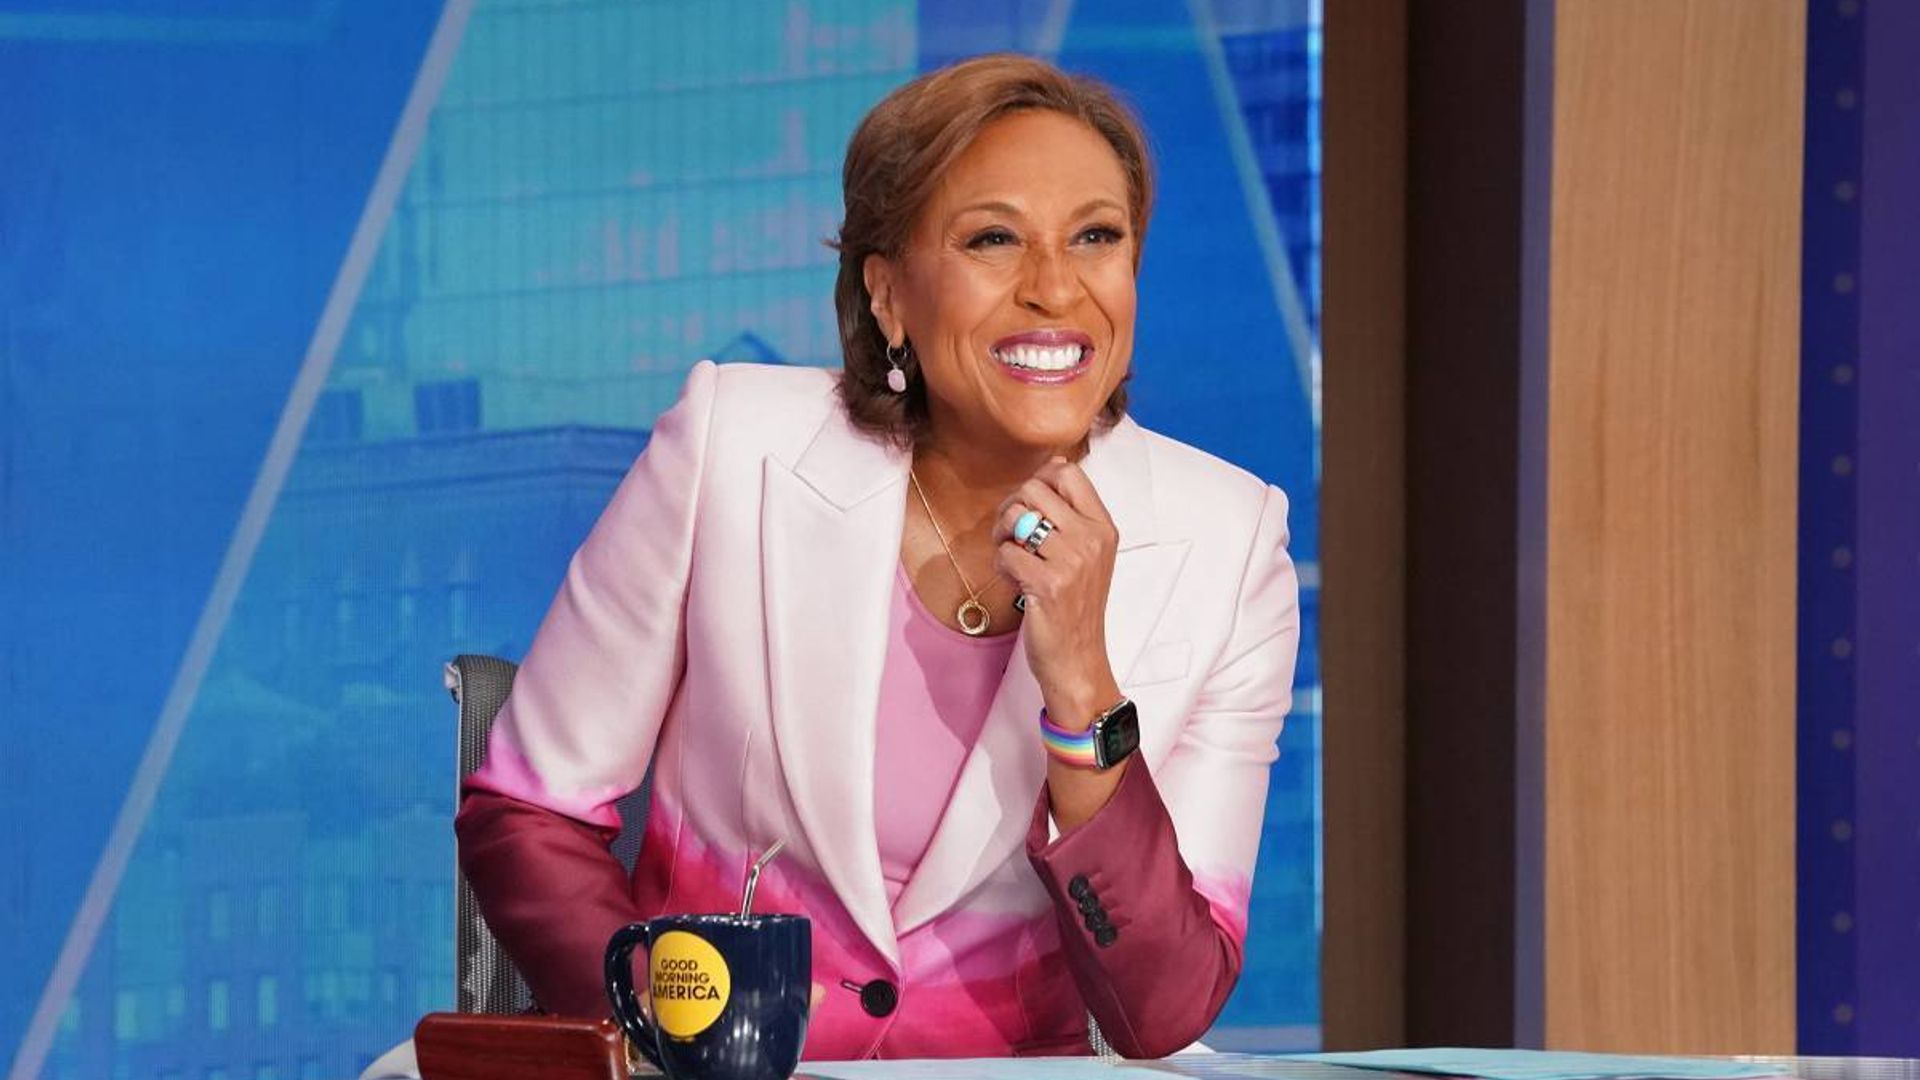 The very special reason Robin Roberts will take a break from GMA hosting in 2023